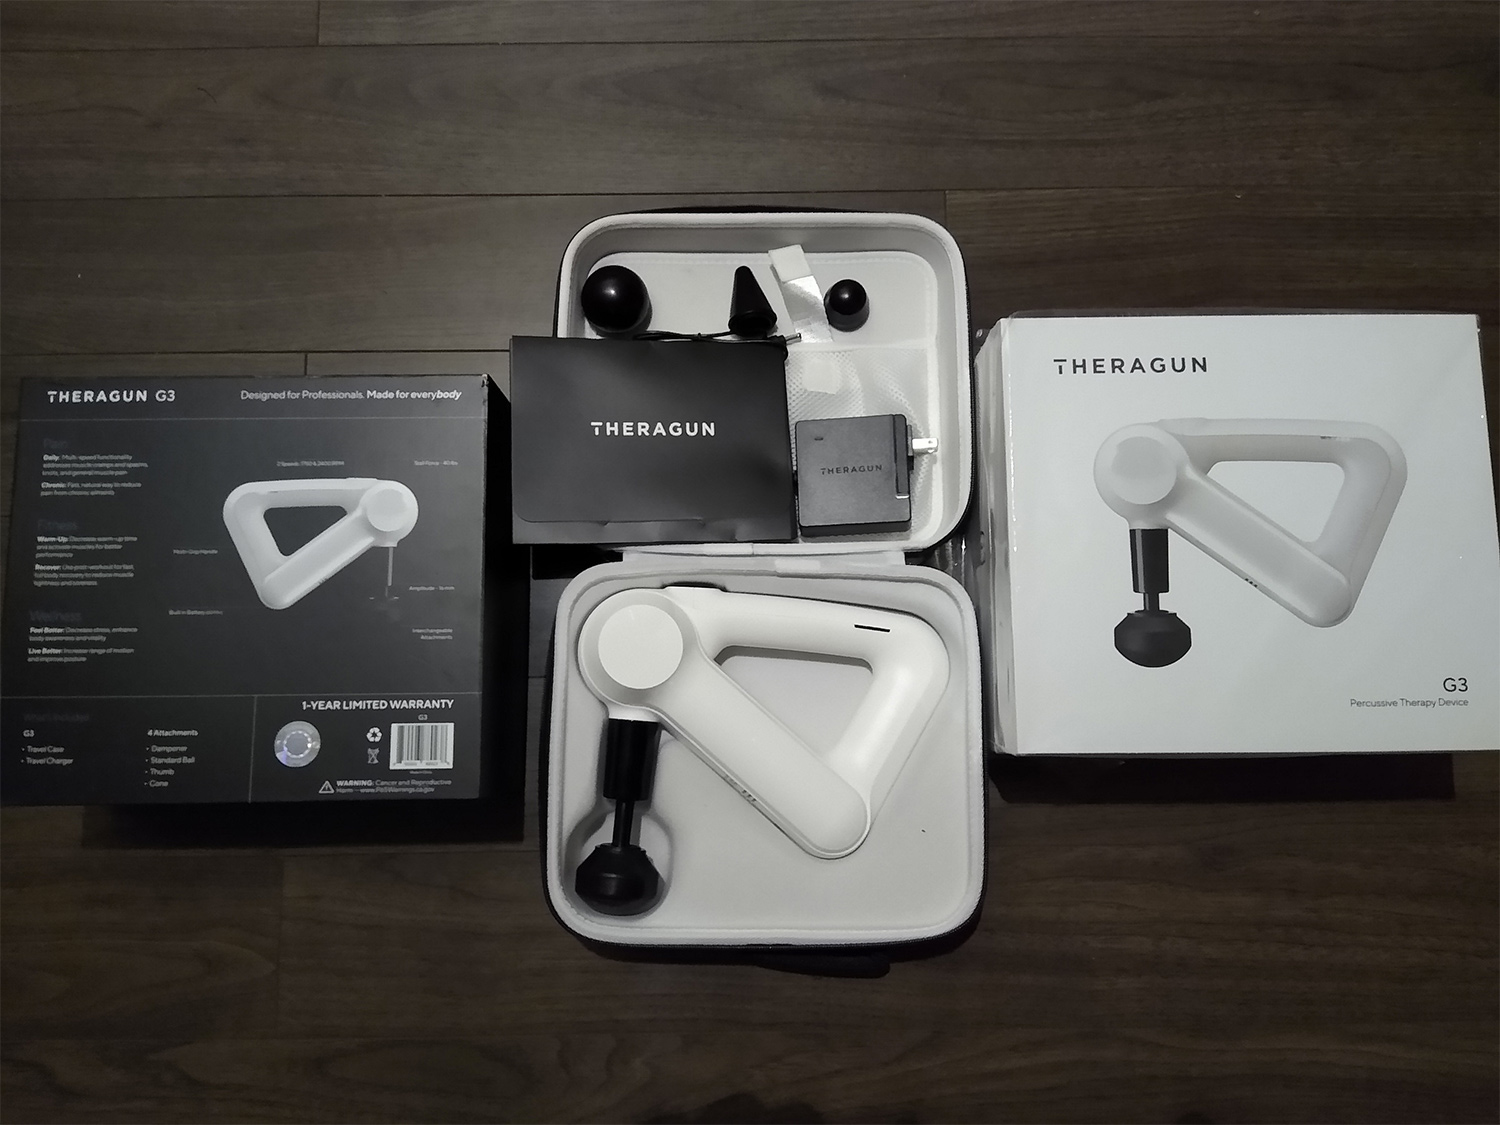 Image of Theragun G3 in White